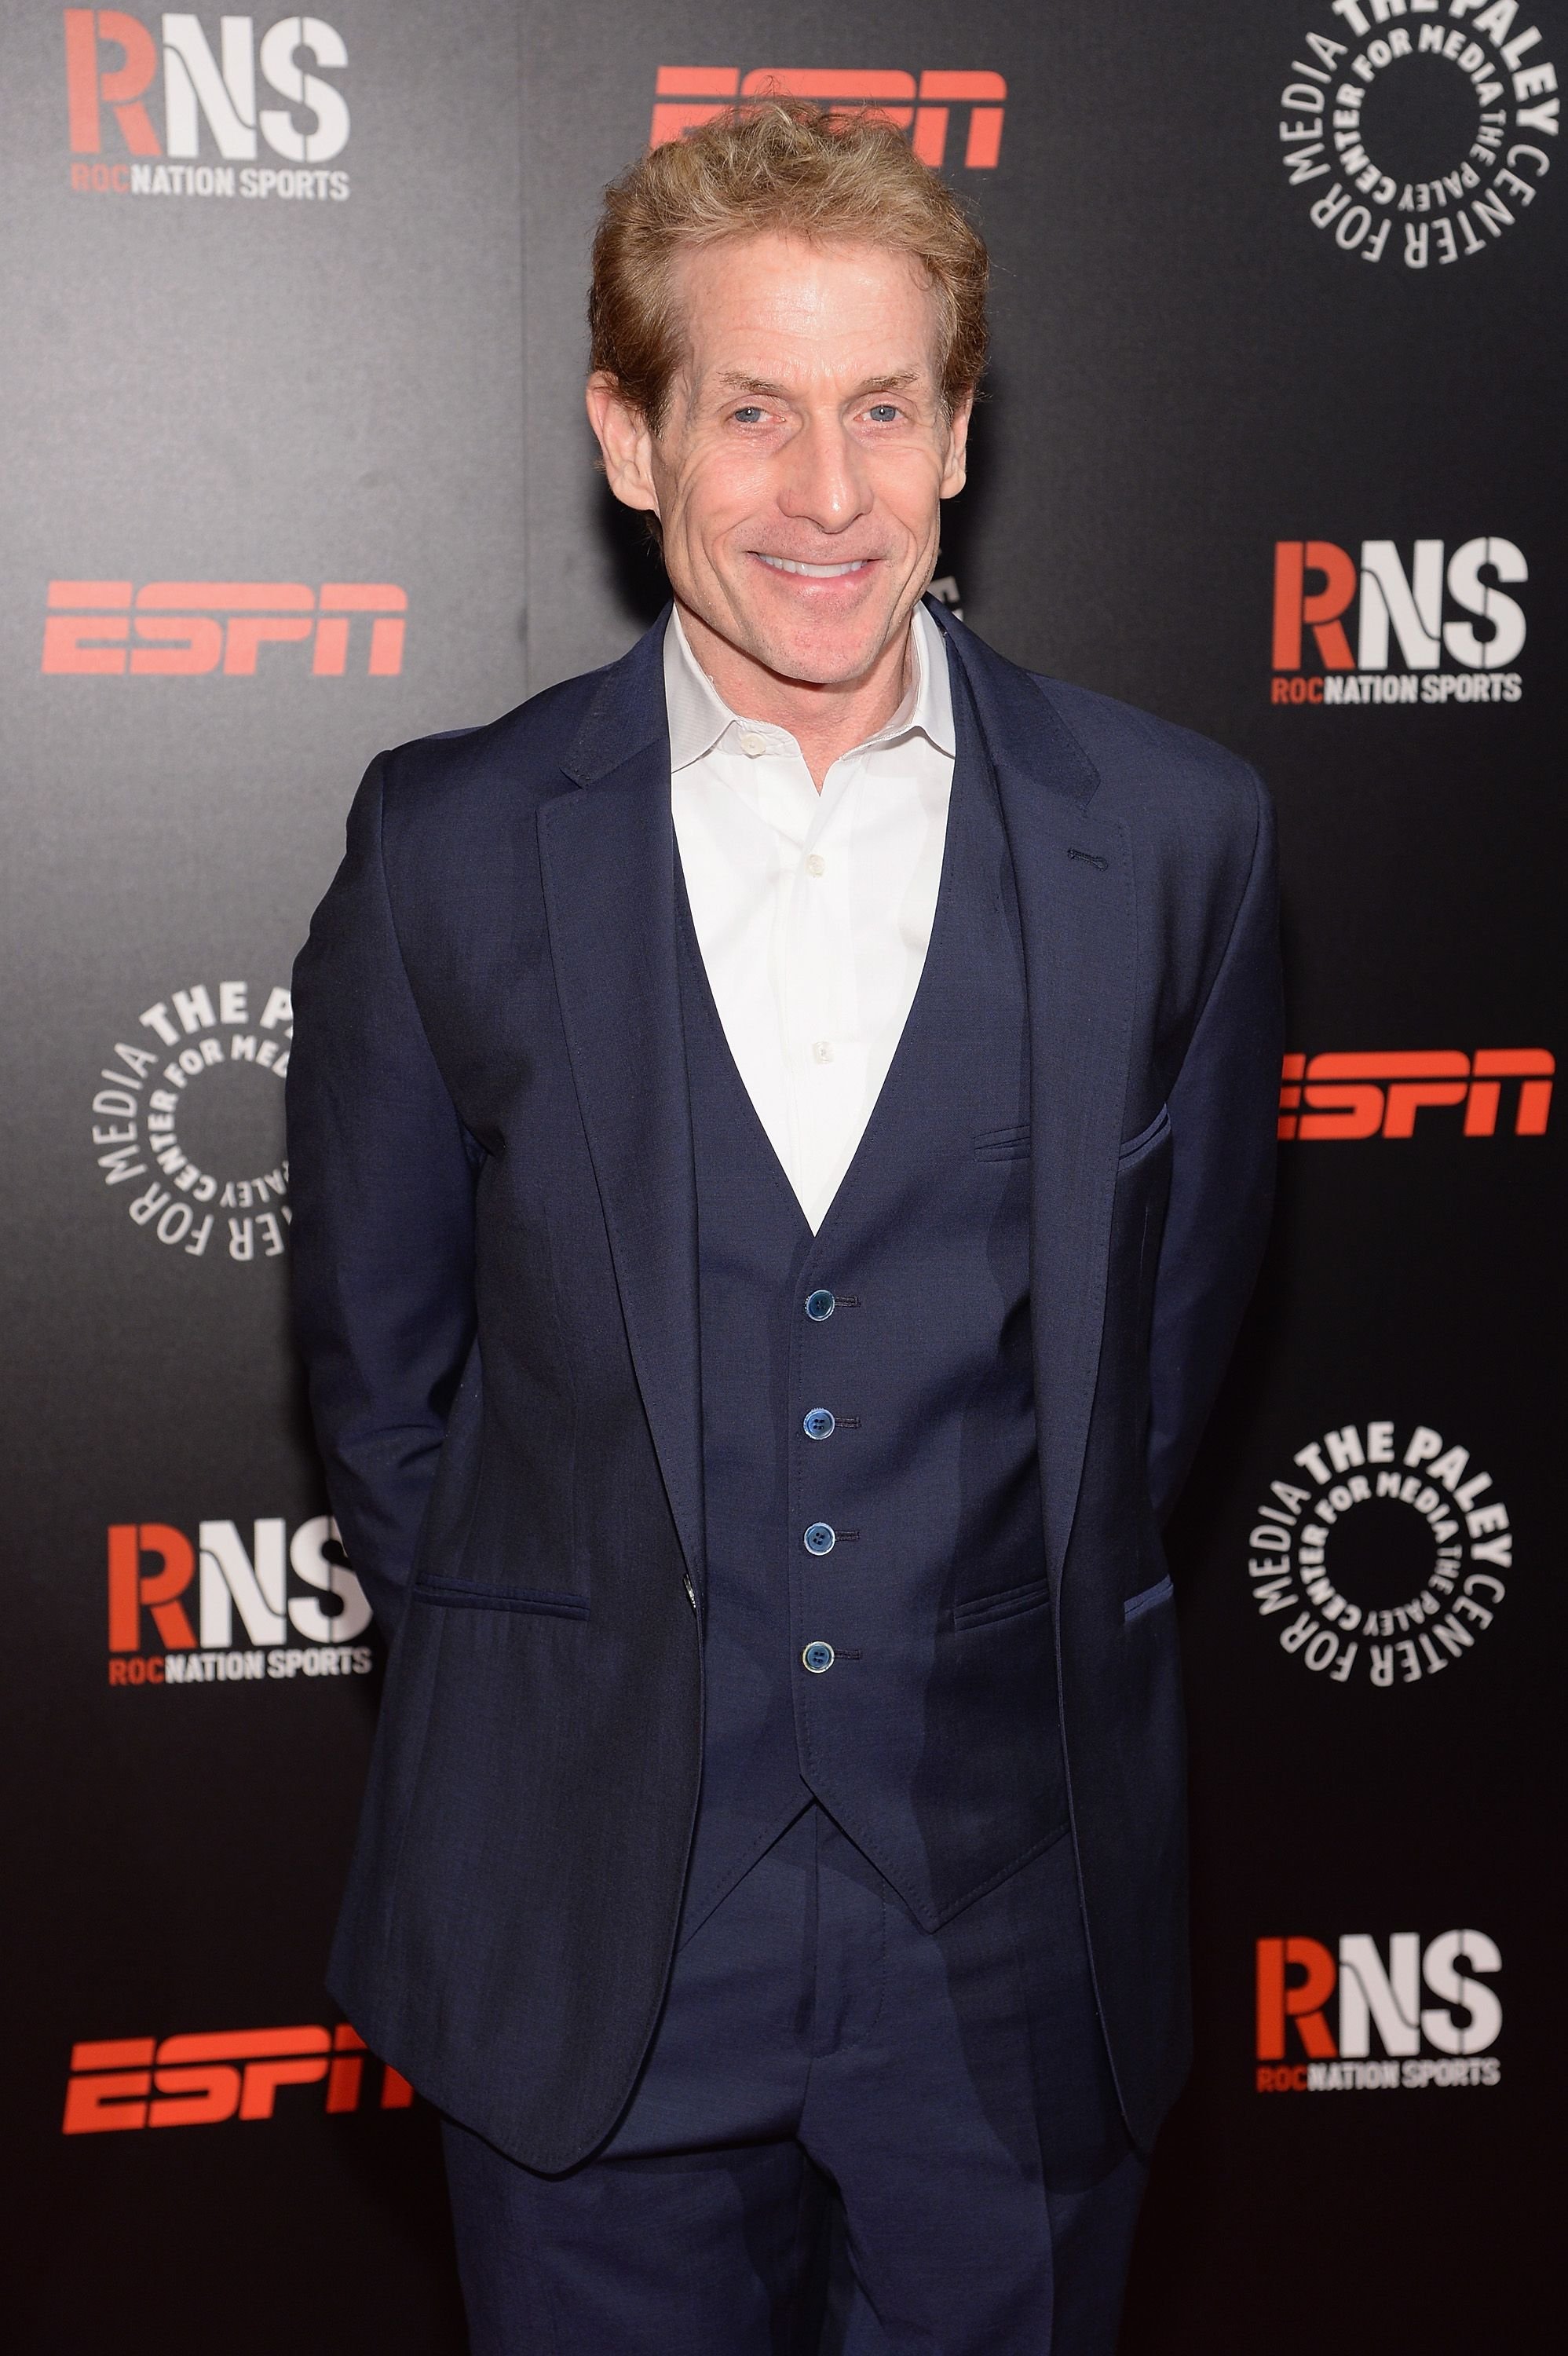 Skip Bayless Said It Was Love at First Spark with Wife Ernestine